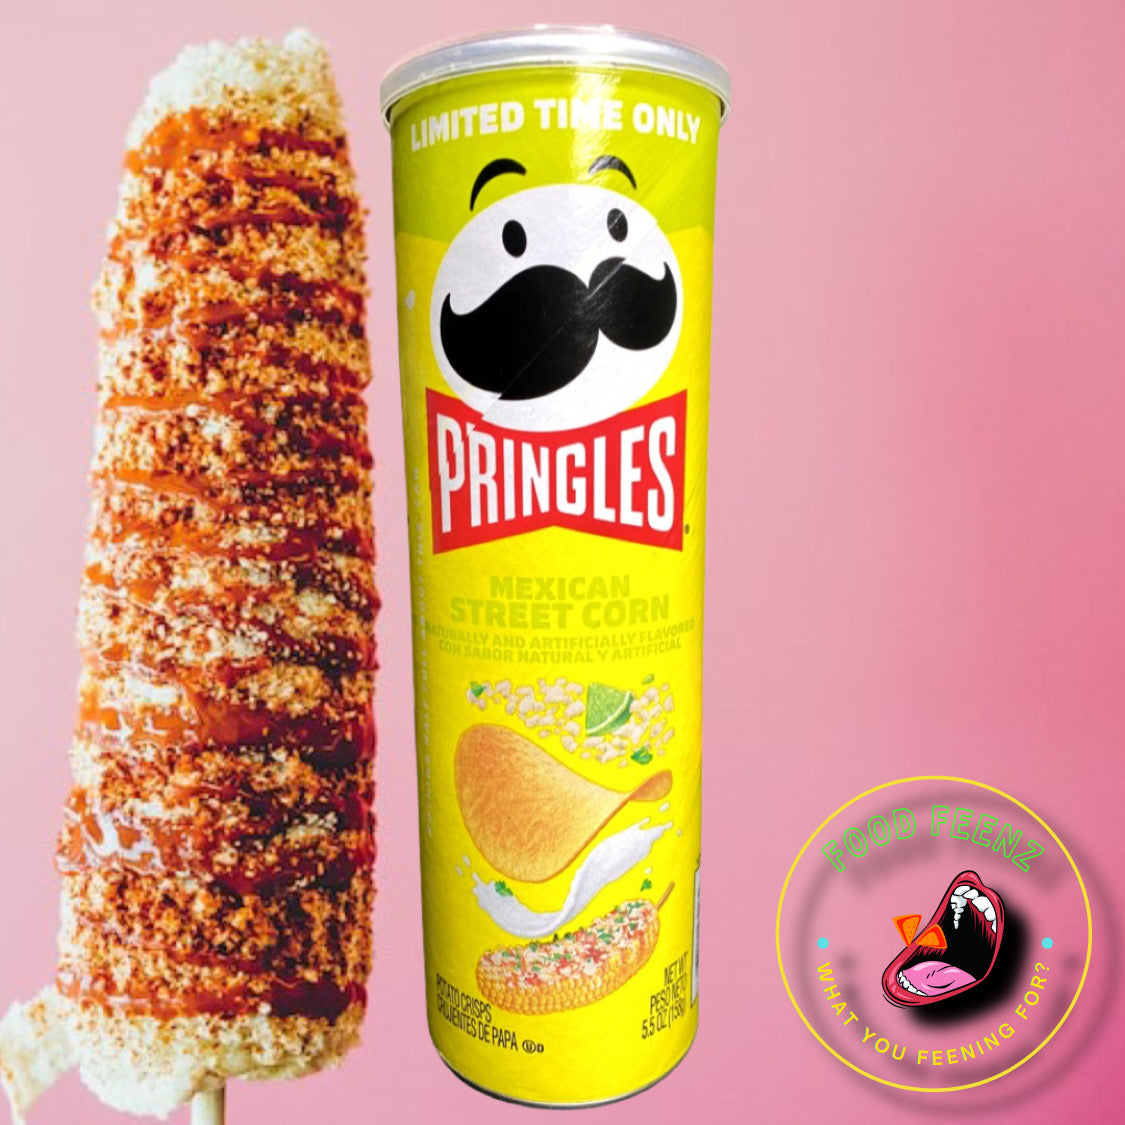 Pringles Mexican Street Corn (Limited Edition)